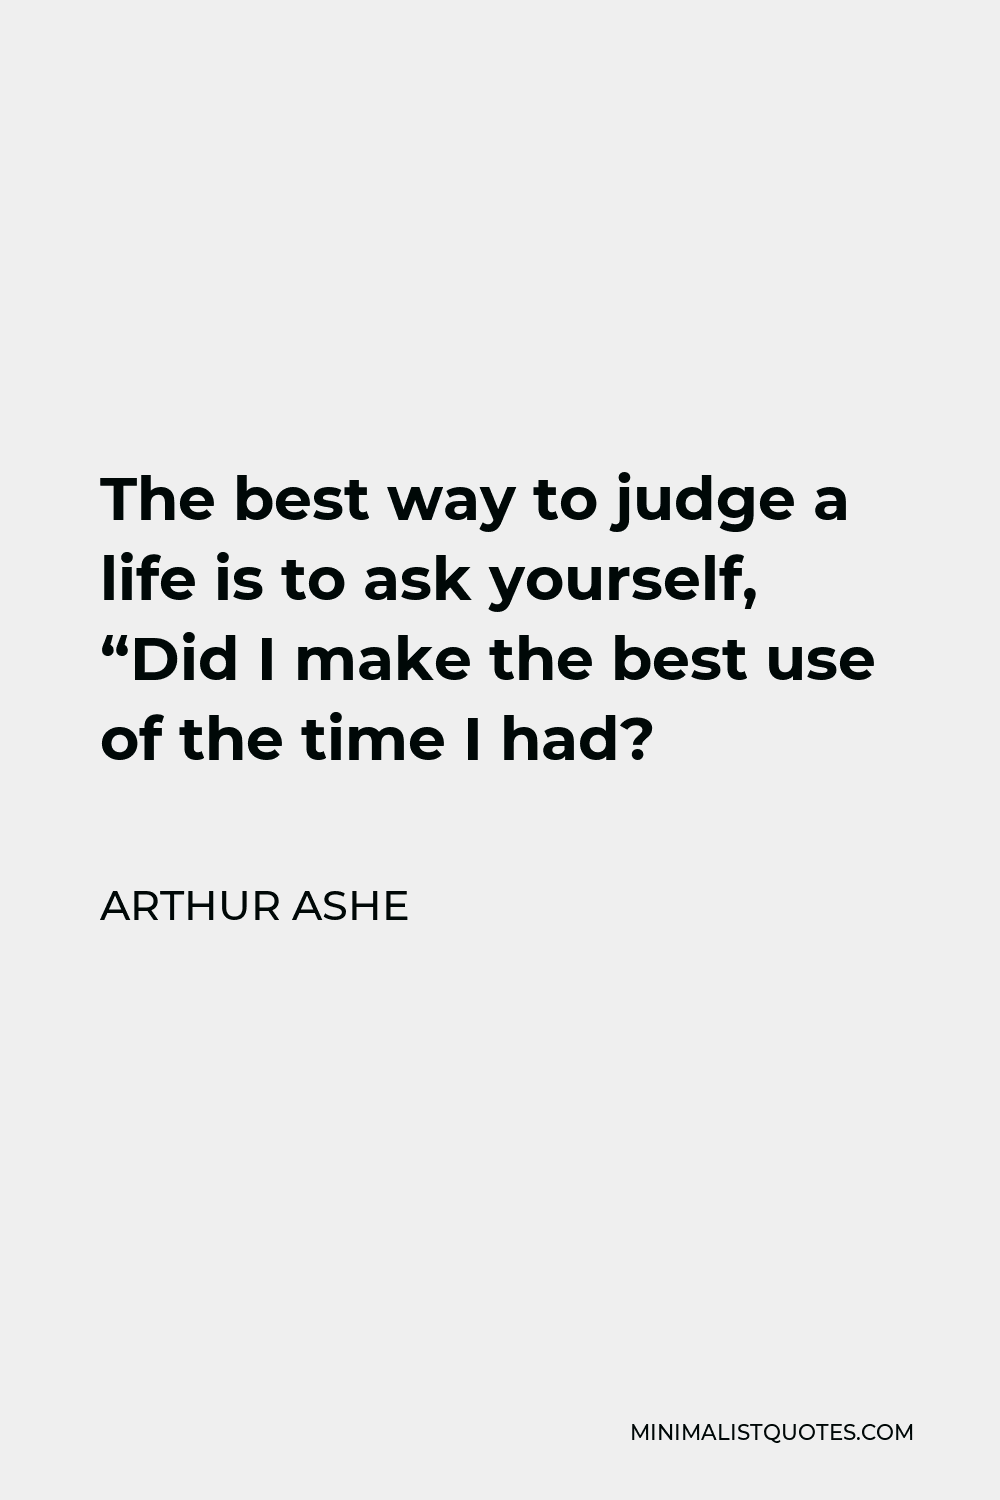 Arthur Ashe Quote - The best way to judge a life is to ask yourself, “Did I make the best use of the time I had?